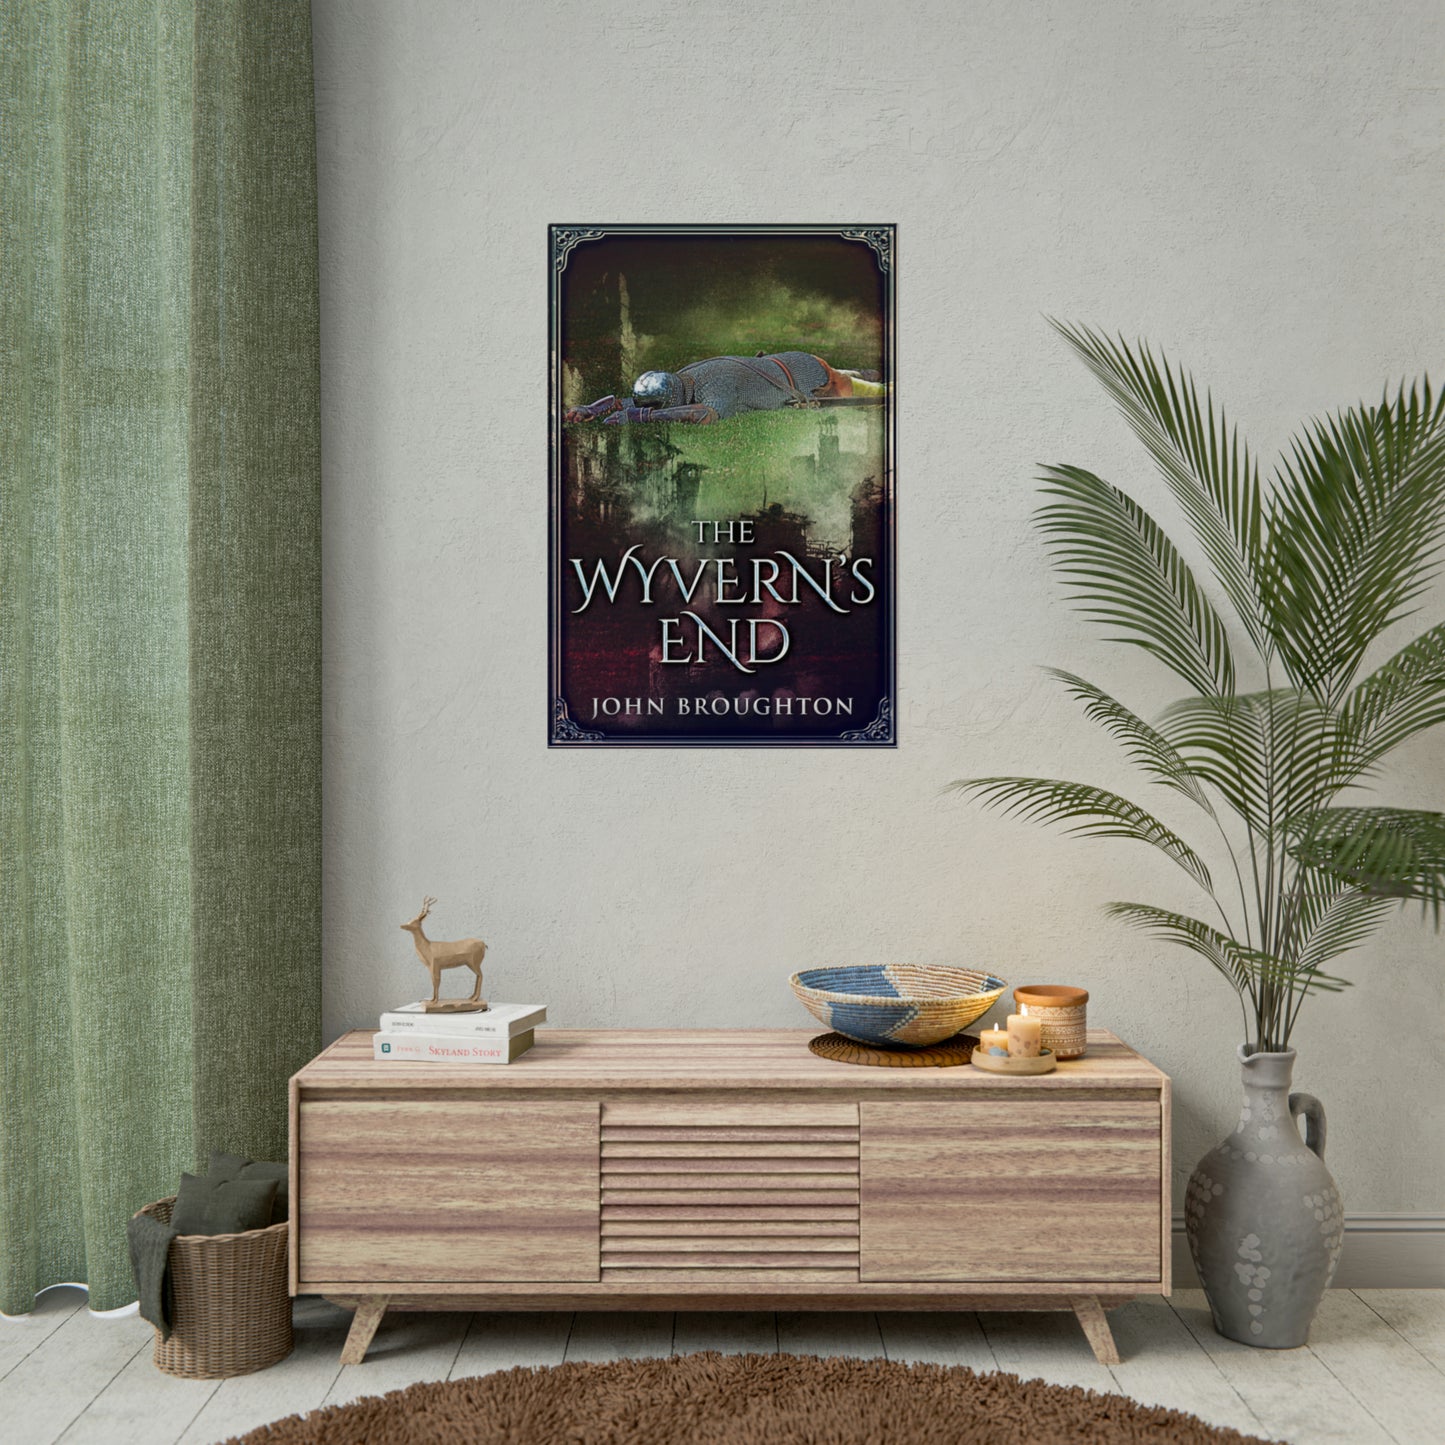 The Wyvern's End - Rolled Poster